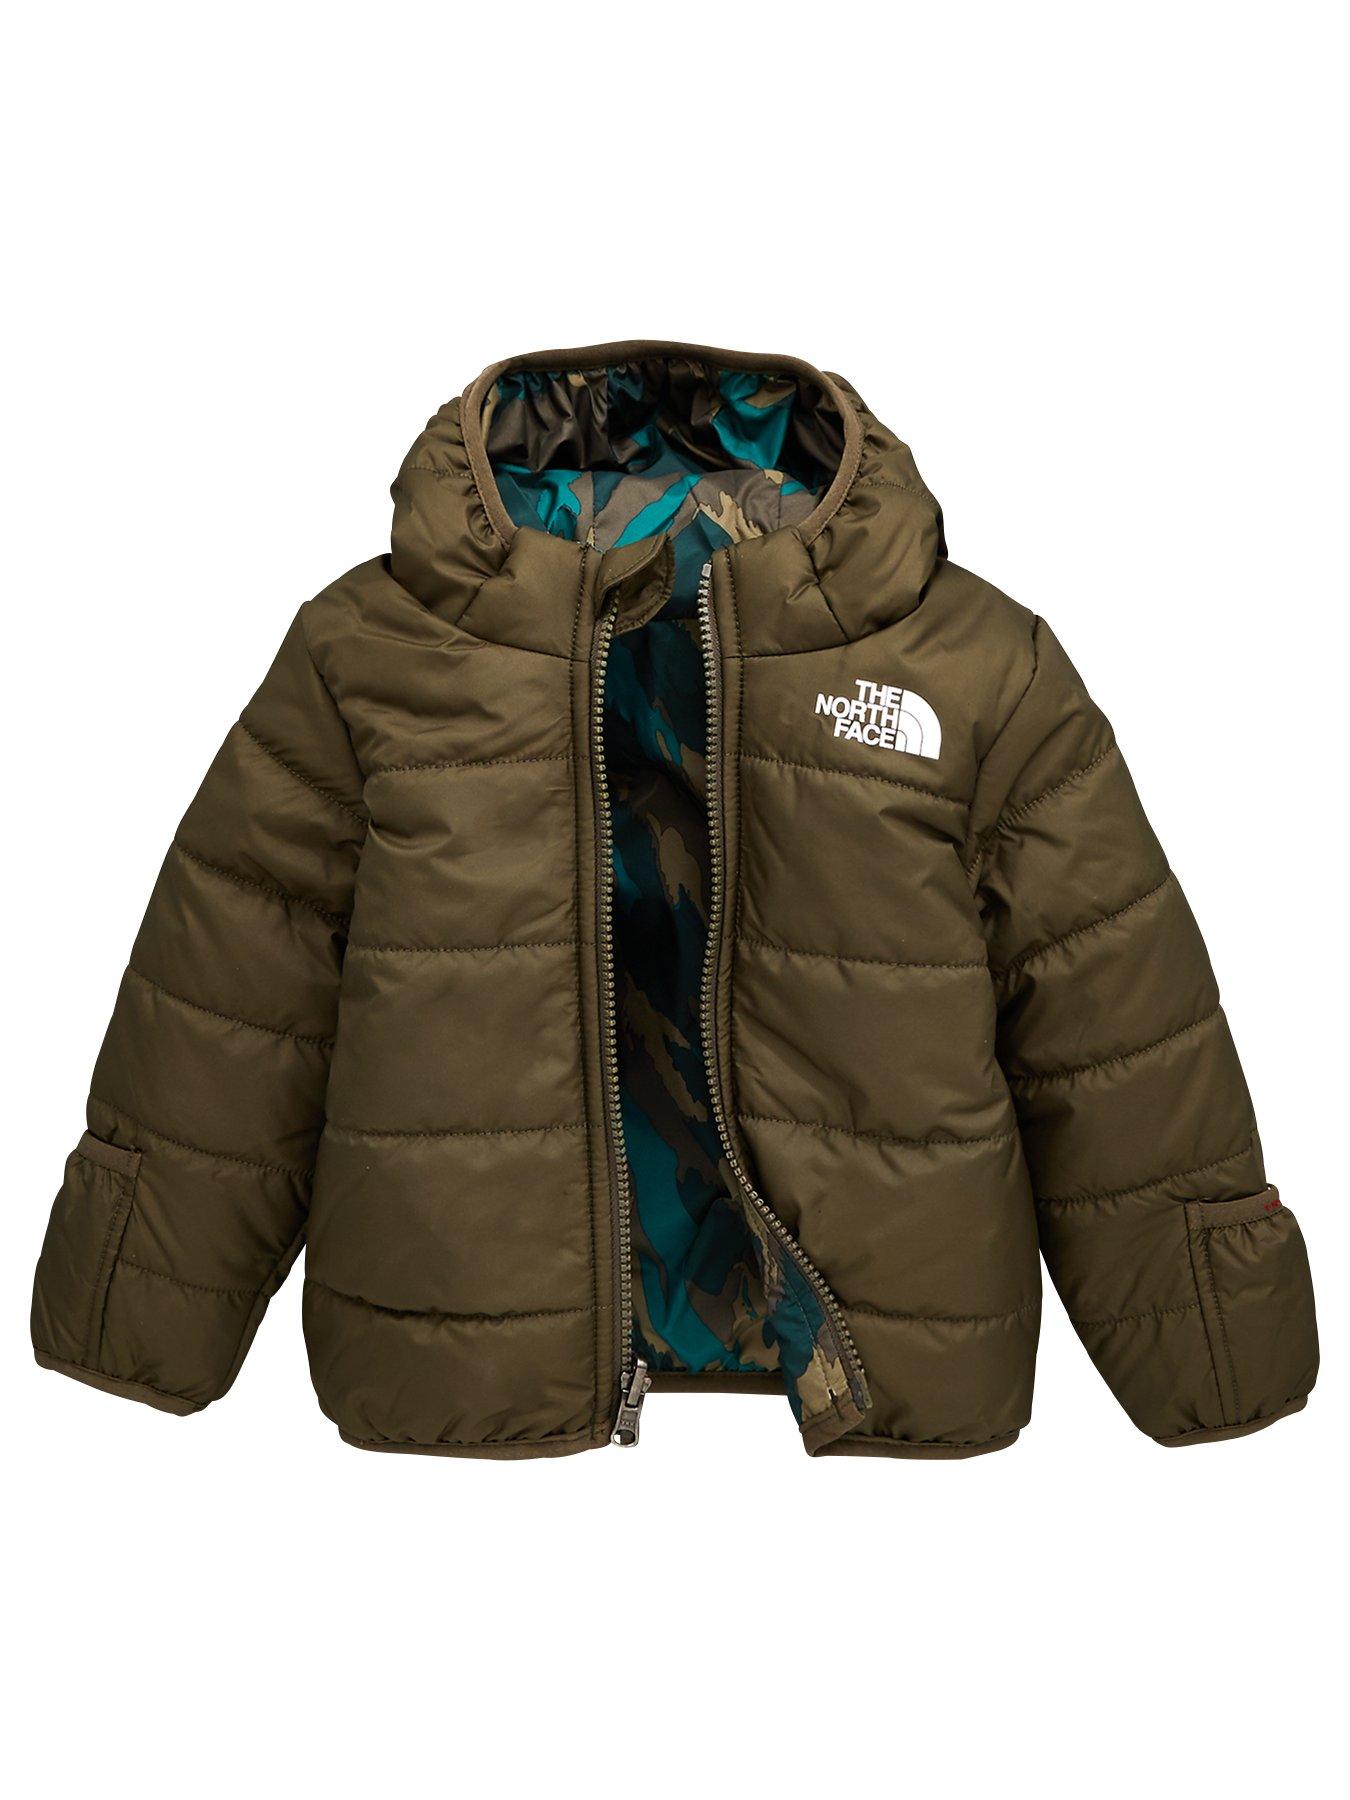 THE NORTH FACE Infant Reversible 